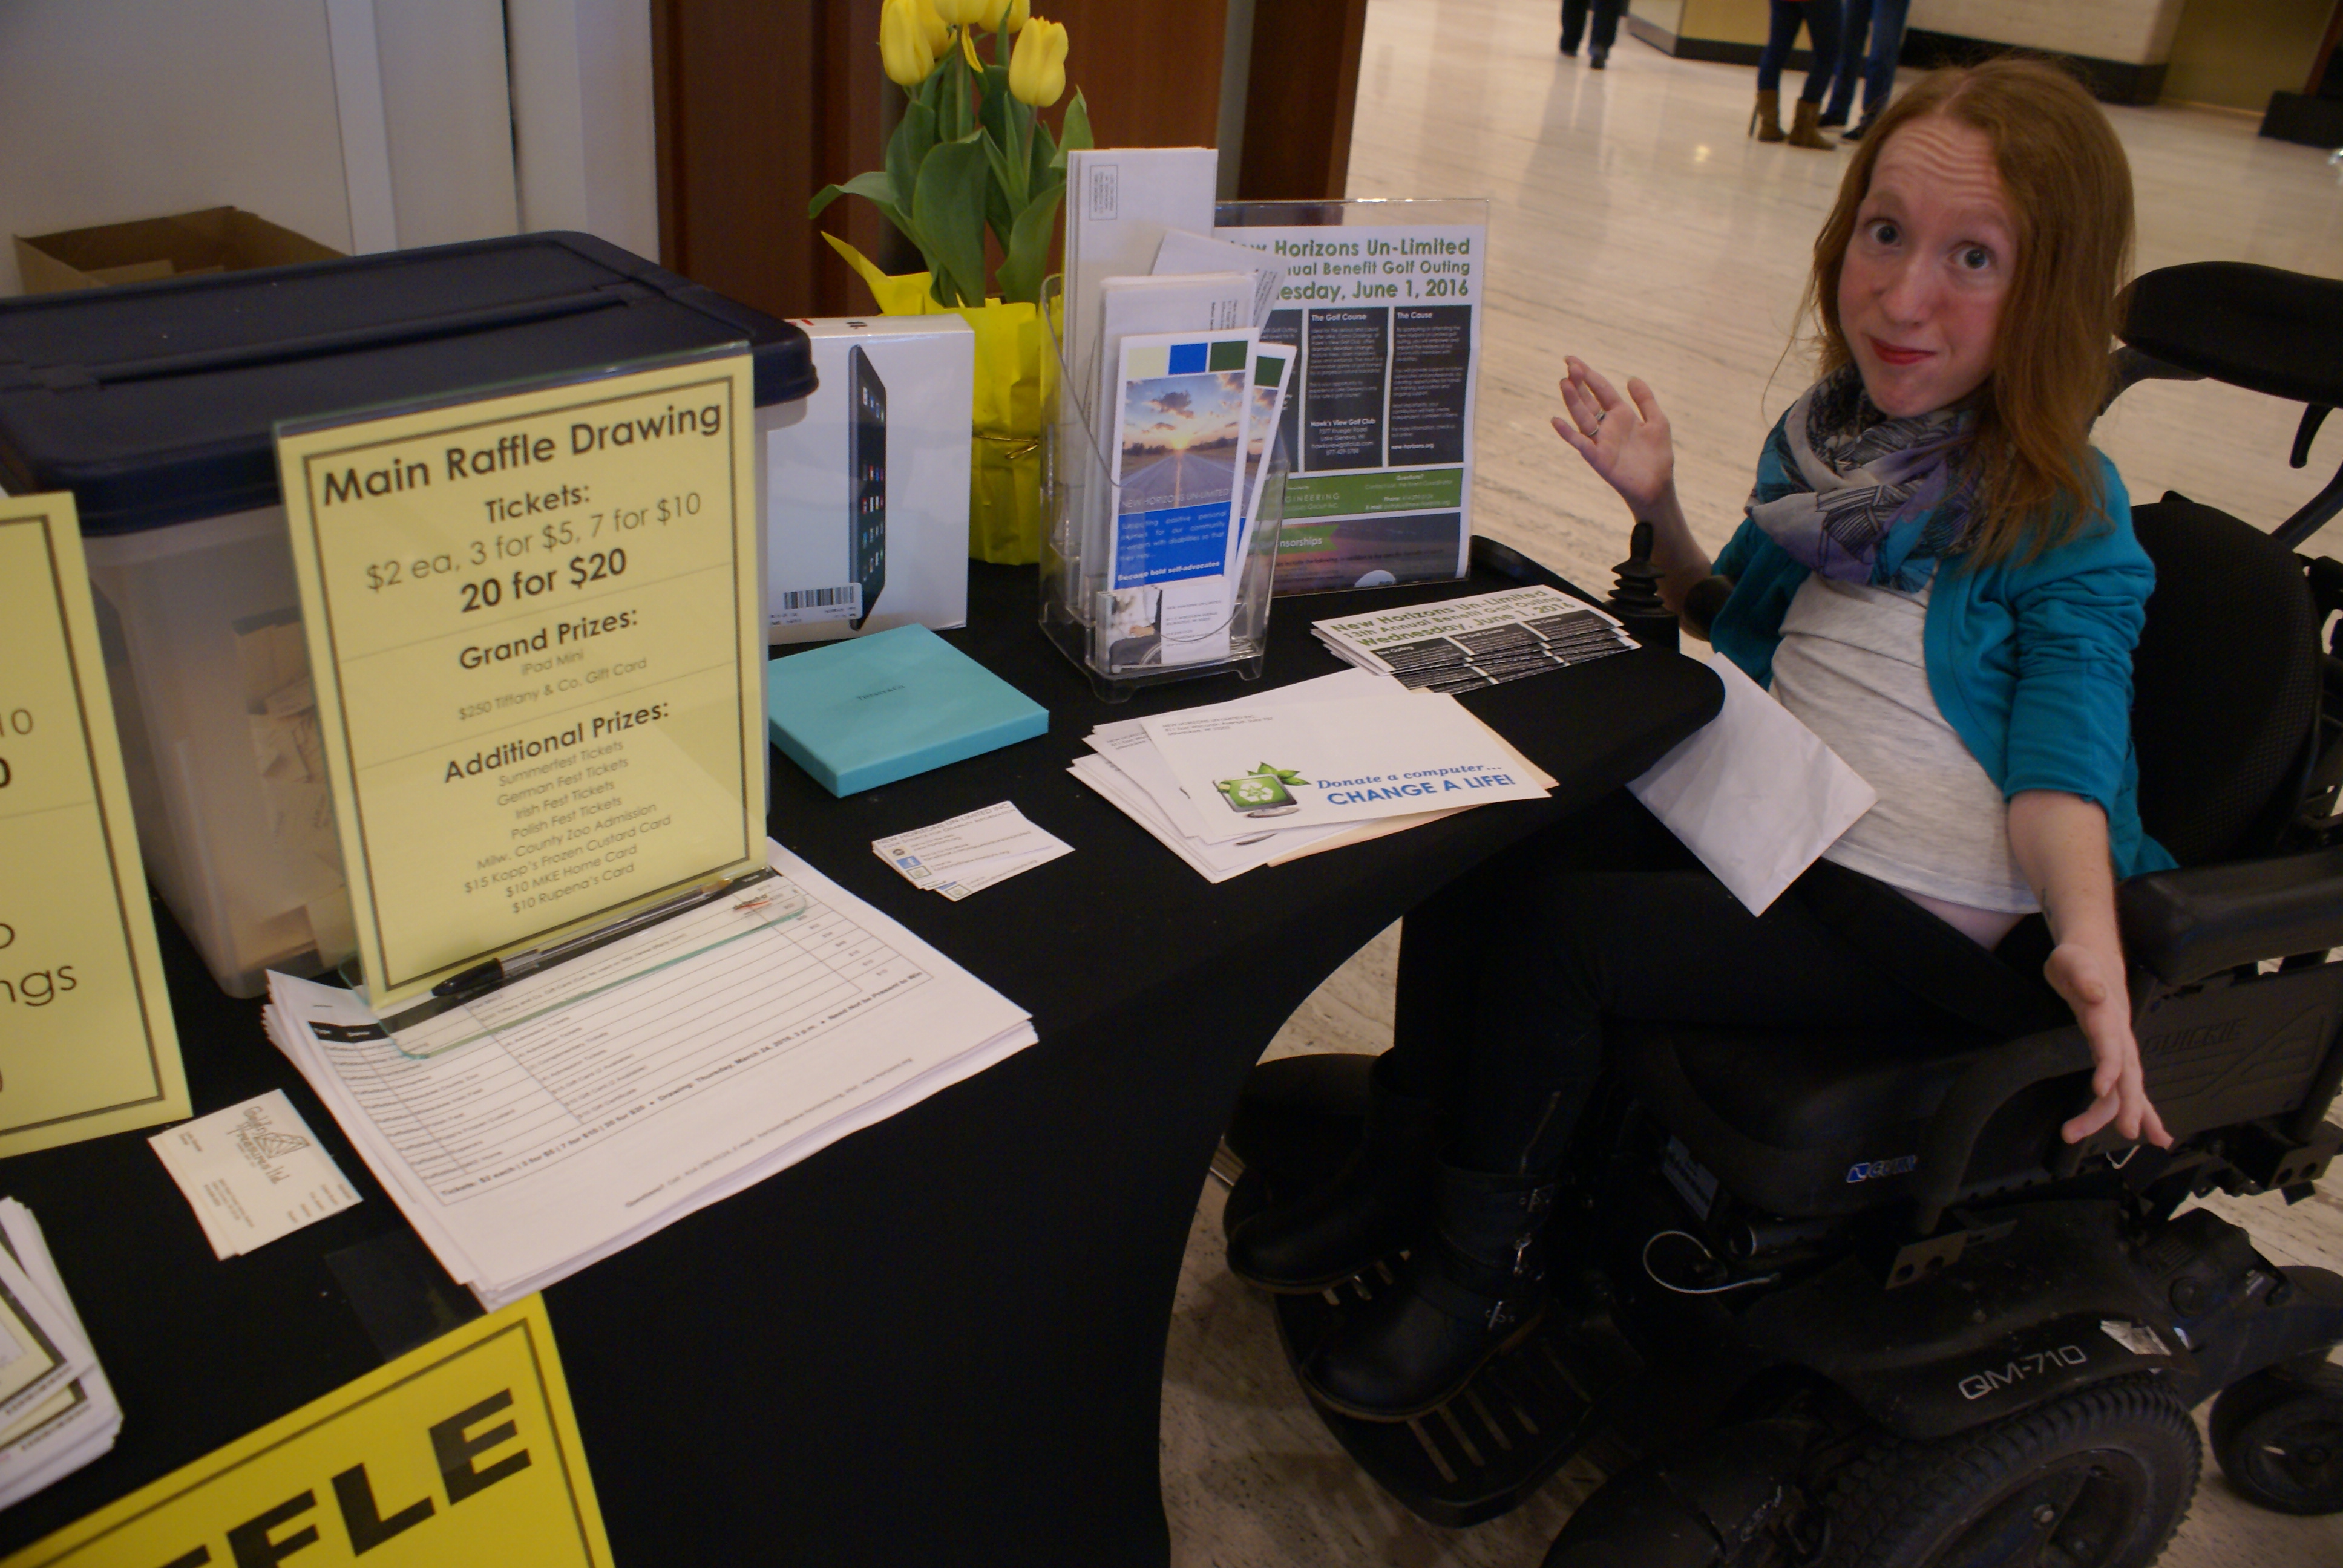 Staff member happily displaying event table